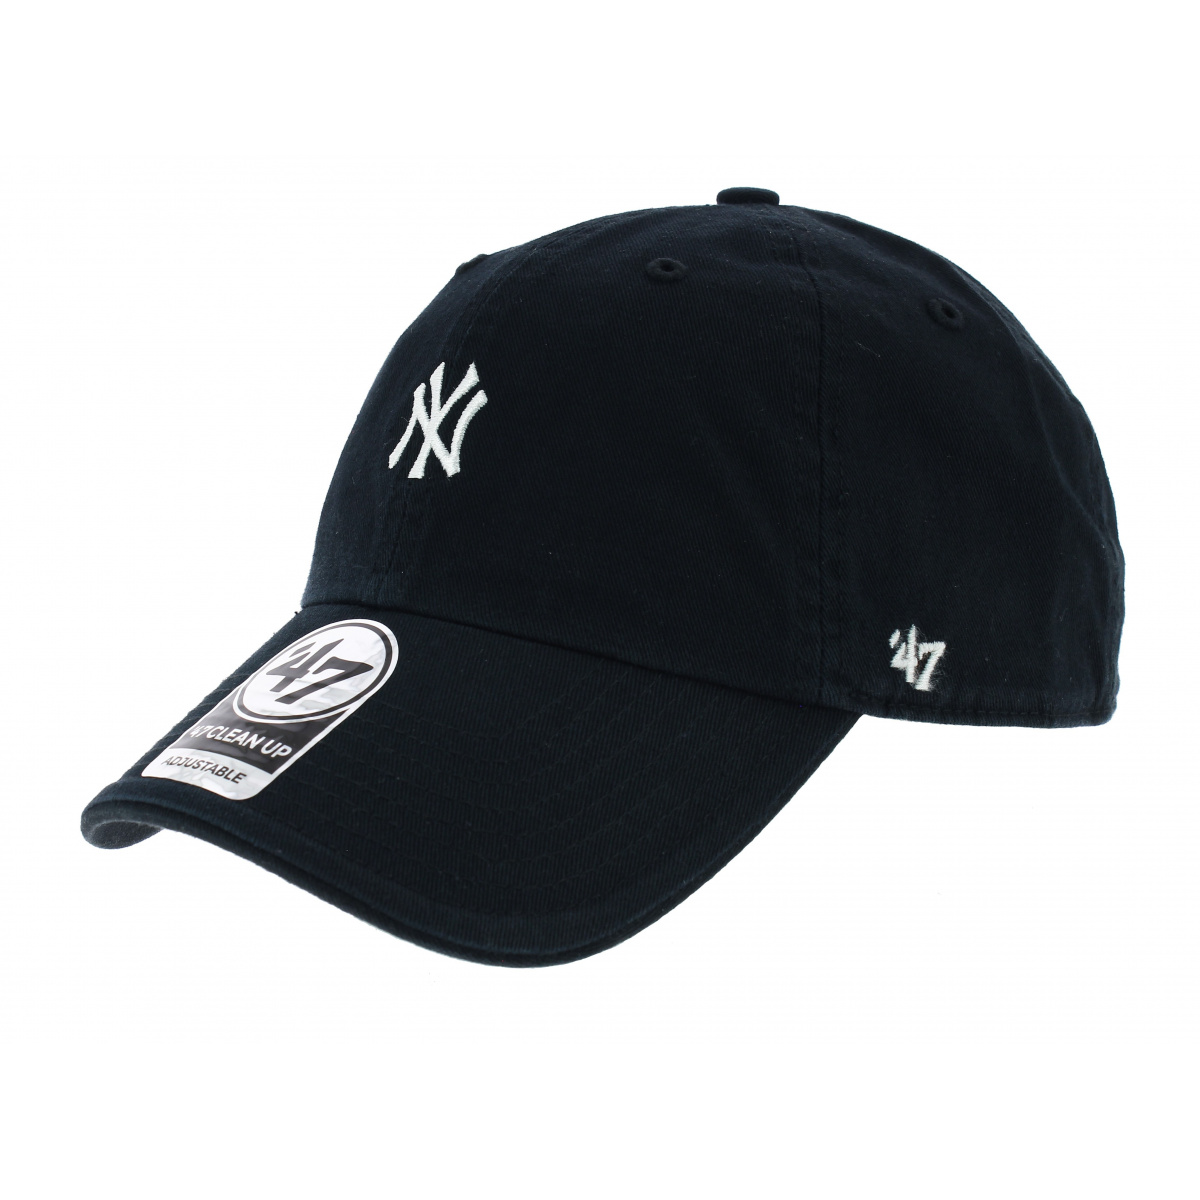 Casquette NY Yankees marine - 47 Brand Reference : 5632